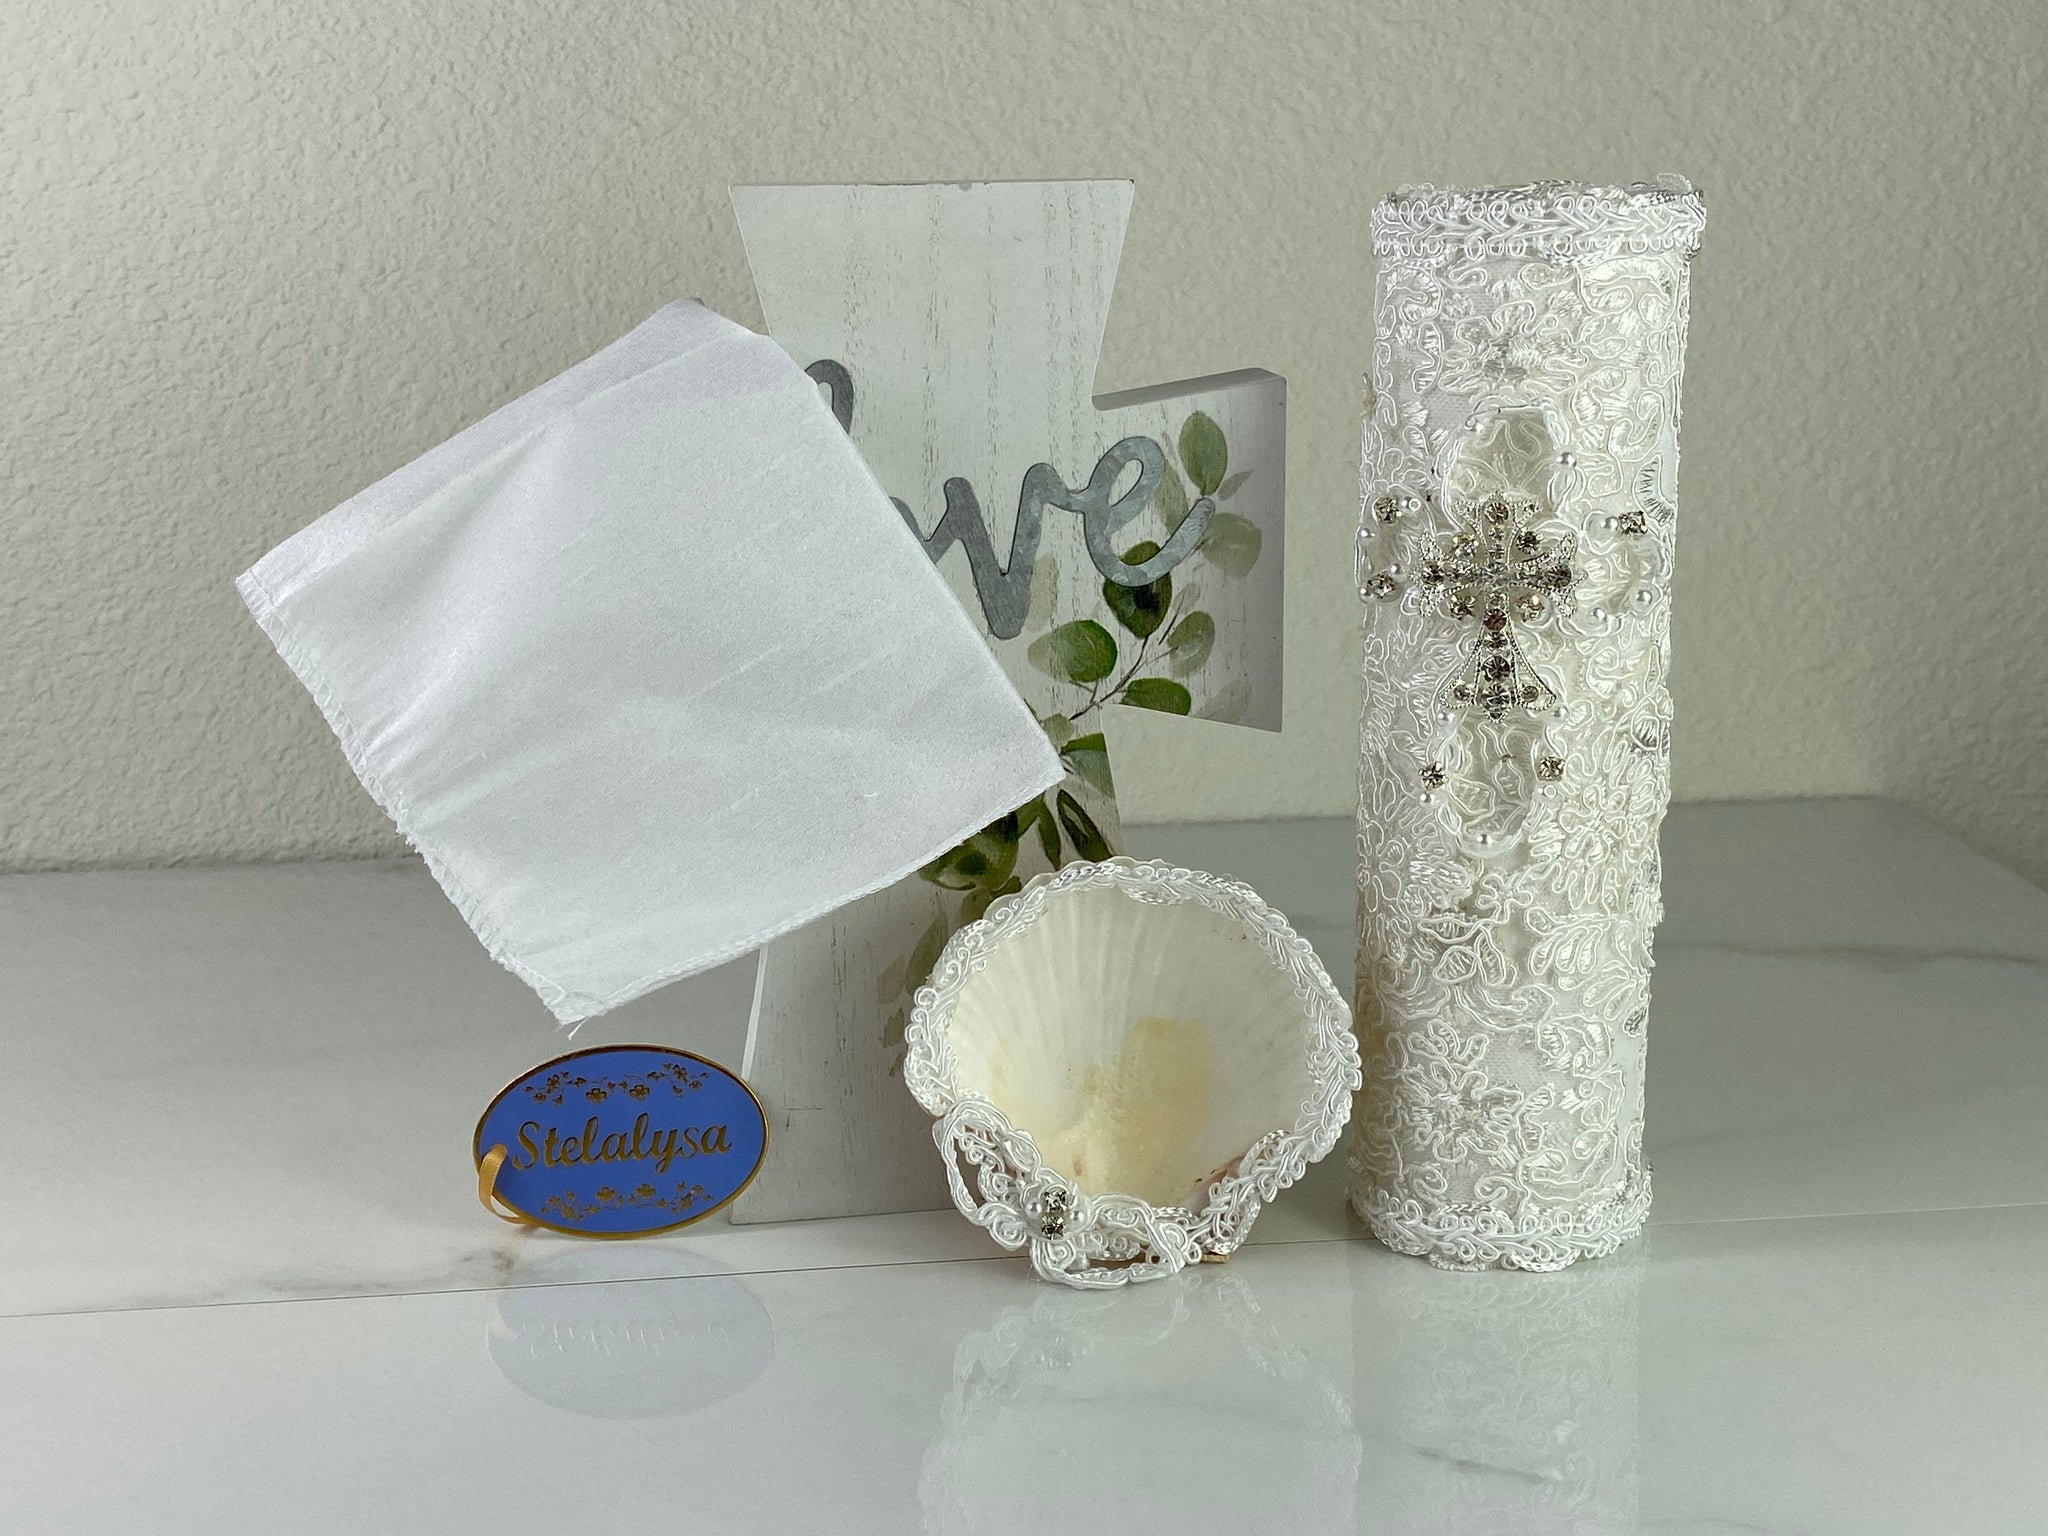 These one-of-a-kind Candle set is handmade and white in color.  This candle has a classic look.   It is uniquely decorated with crystals, lace, and cross making it a gorgeous keepsake.   This candle is cylinder in shape.    To match, the Shell is put together piece by piece to compliment the Candle and Handkerchief.  The Handkerchief is made of satin and embroidered lace to match the Shell and Candle beautifully.  